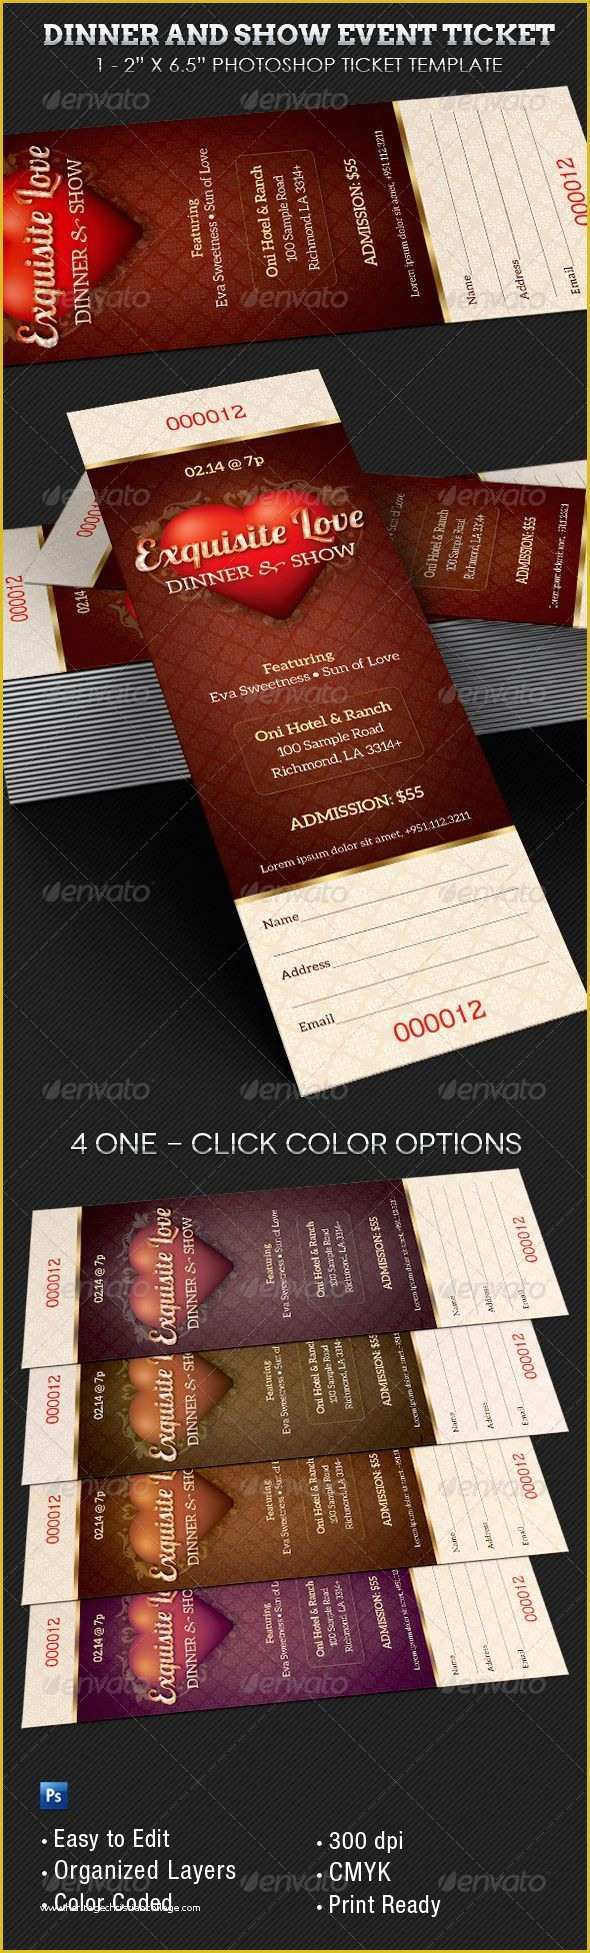 Dinner Ticket Template Free Of Dinner and Dance event Ticket Template